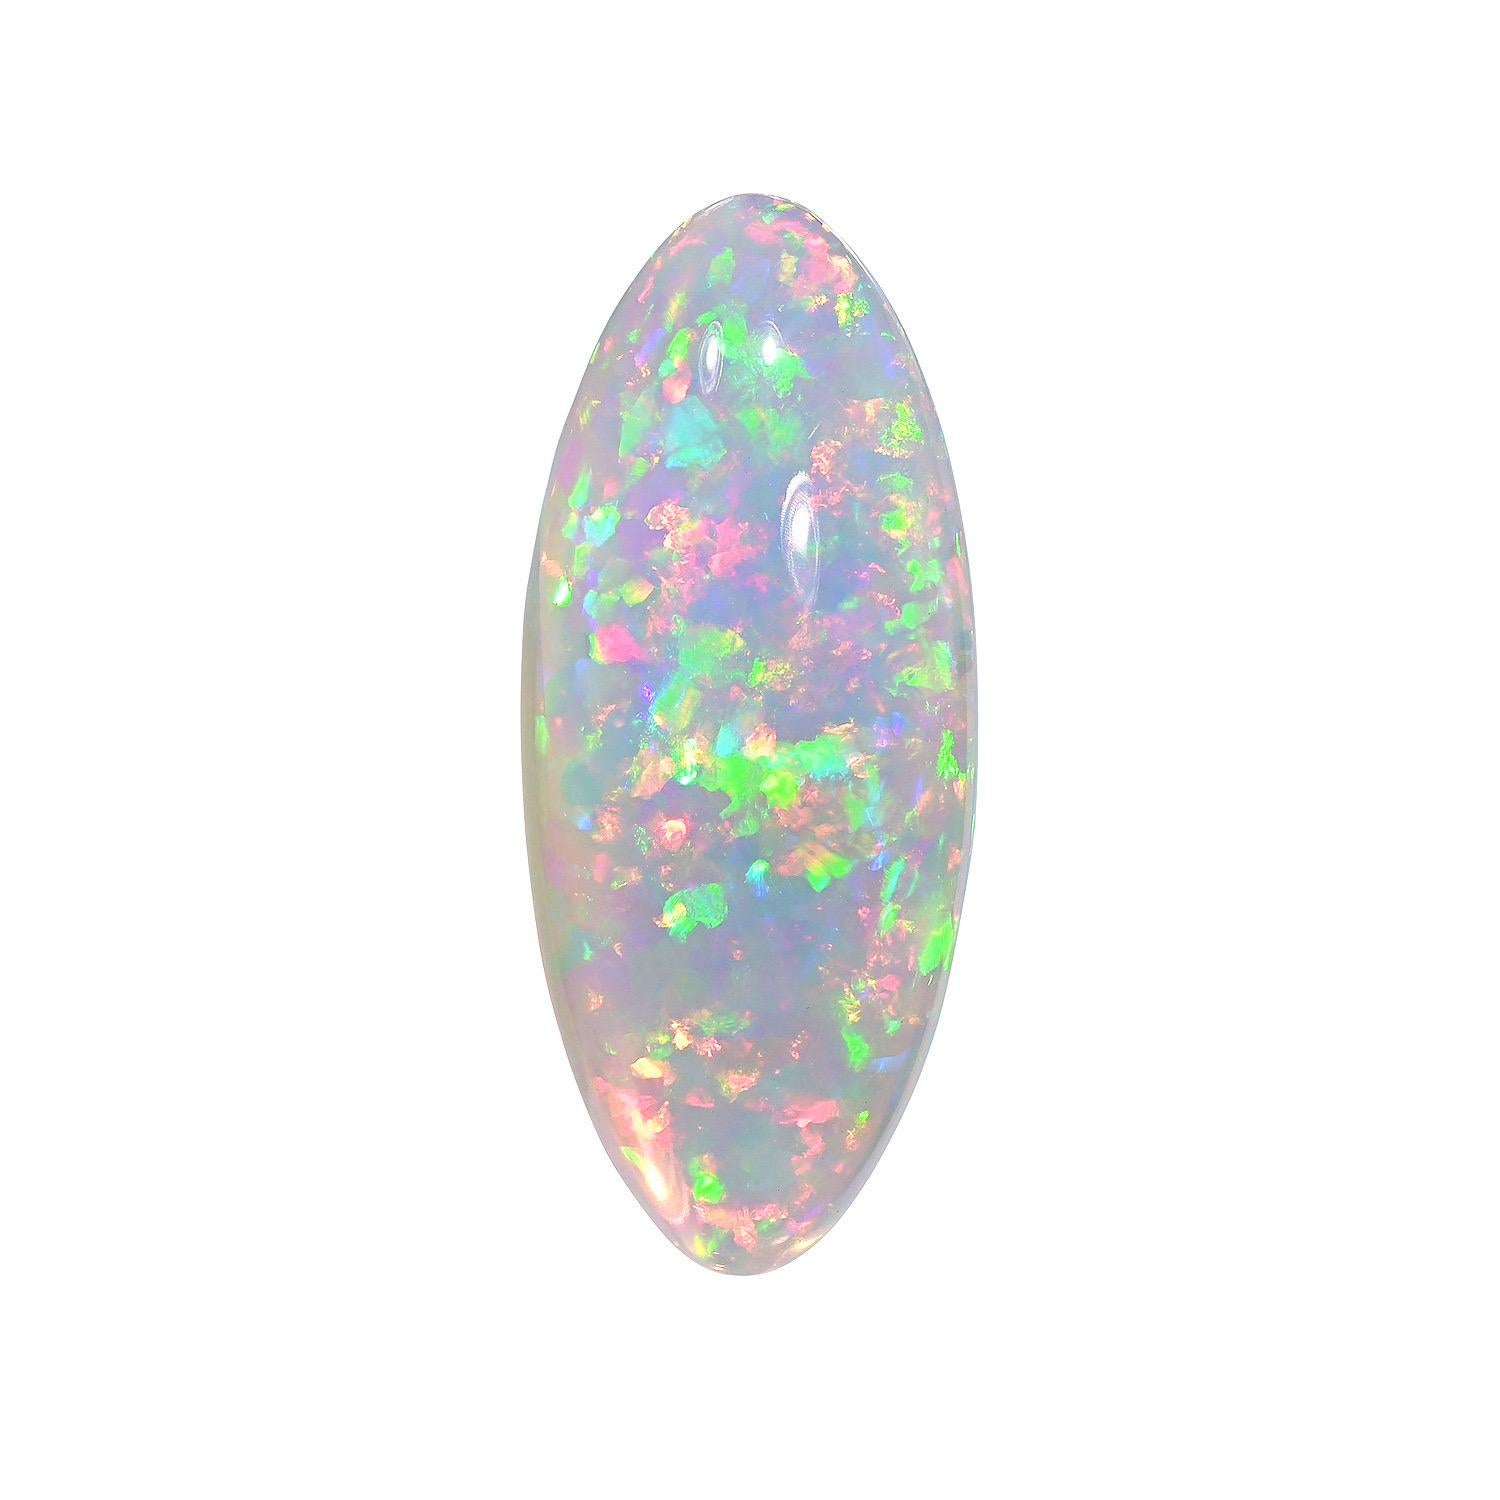 Natural 38.92 carat Marquise Ethiopian Opal loose gemstone, offered unmounted to an avid gem collector.
Returns are accepted and paid by us within 7 days of delivery.
We offer supreme custom jewelry work upon request. Please contact us for more